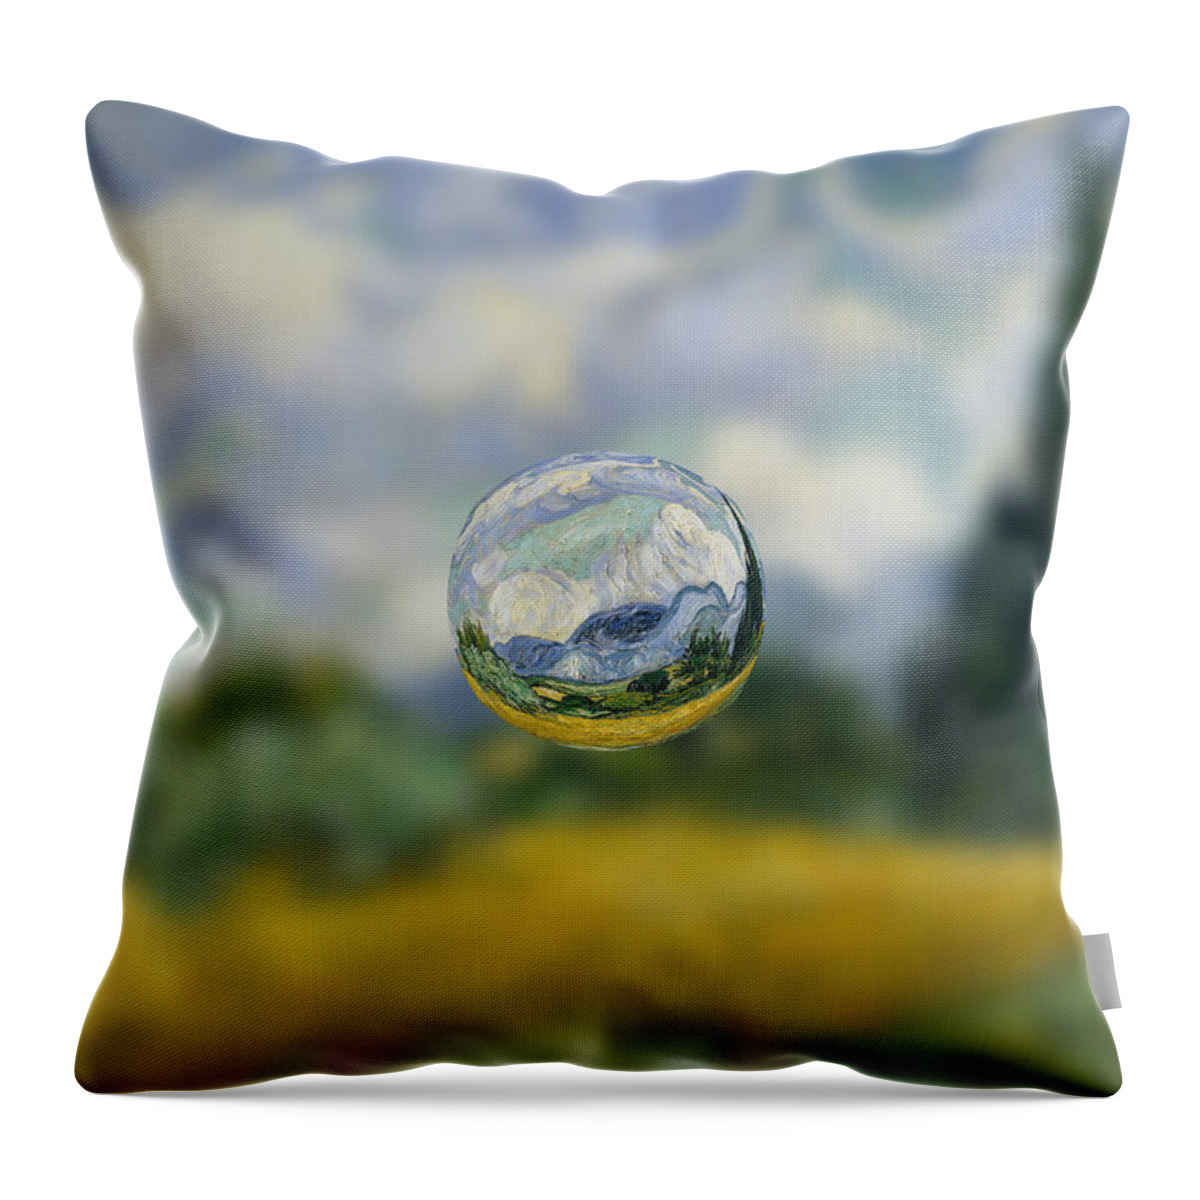 Abstract In The Living Room Throw Pillow featuring the digital art Sphere 7 van Gogh by David Bridburg